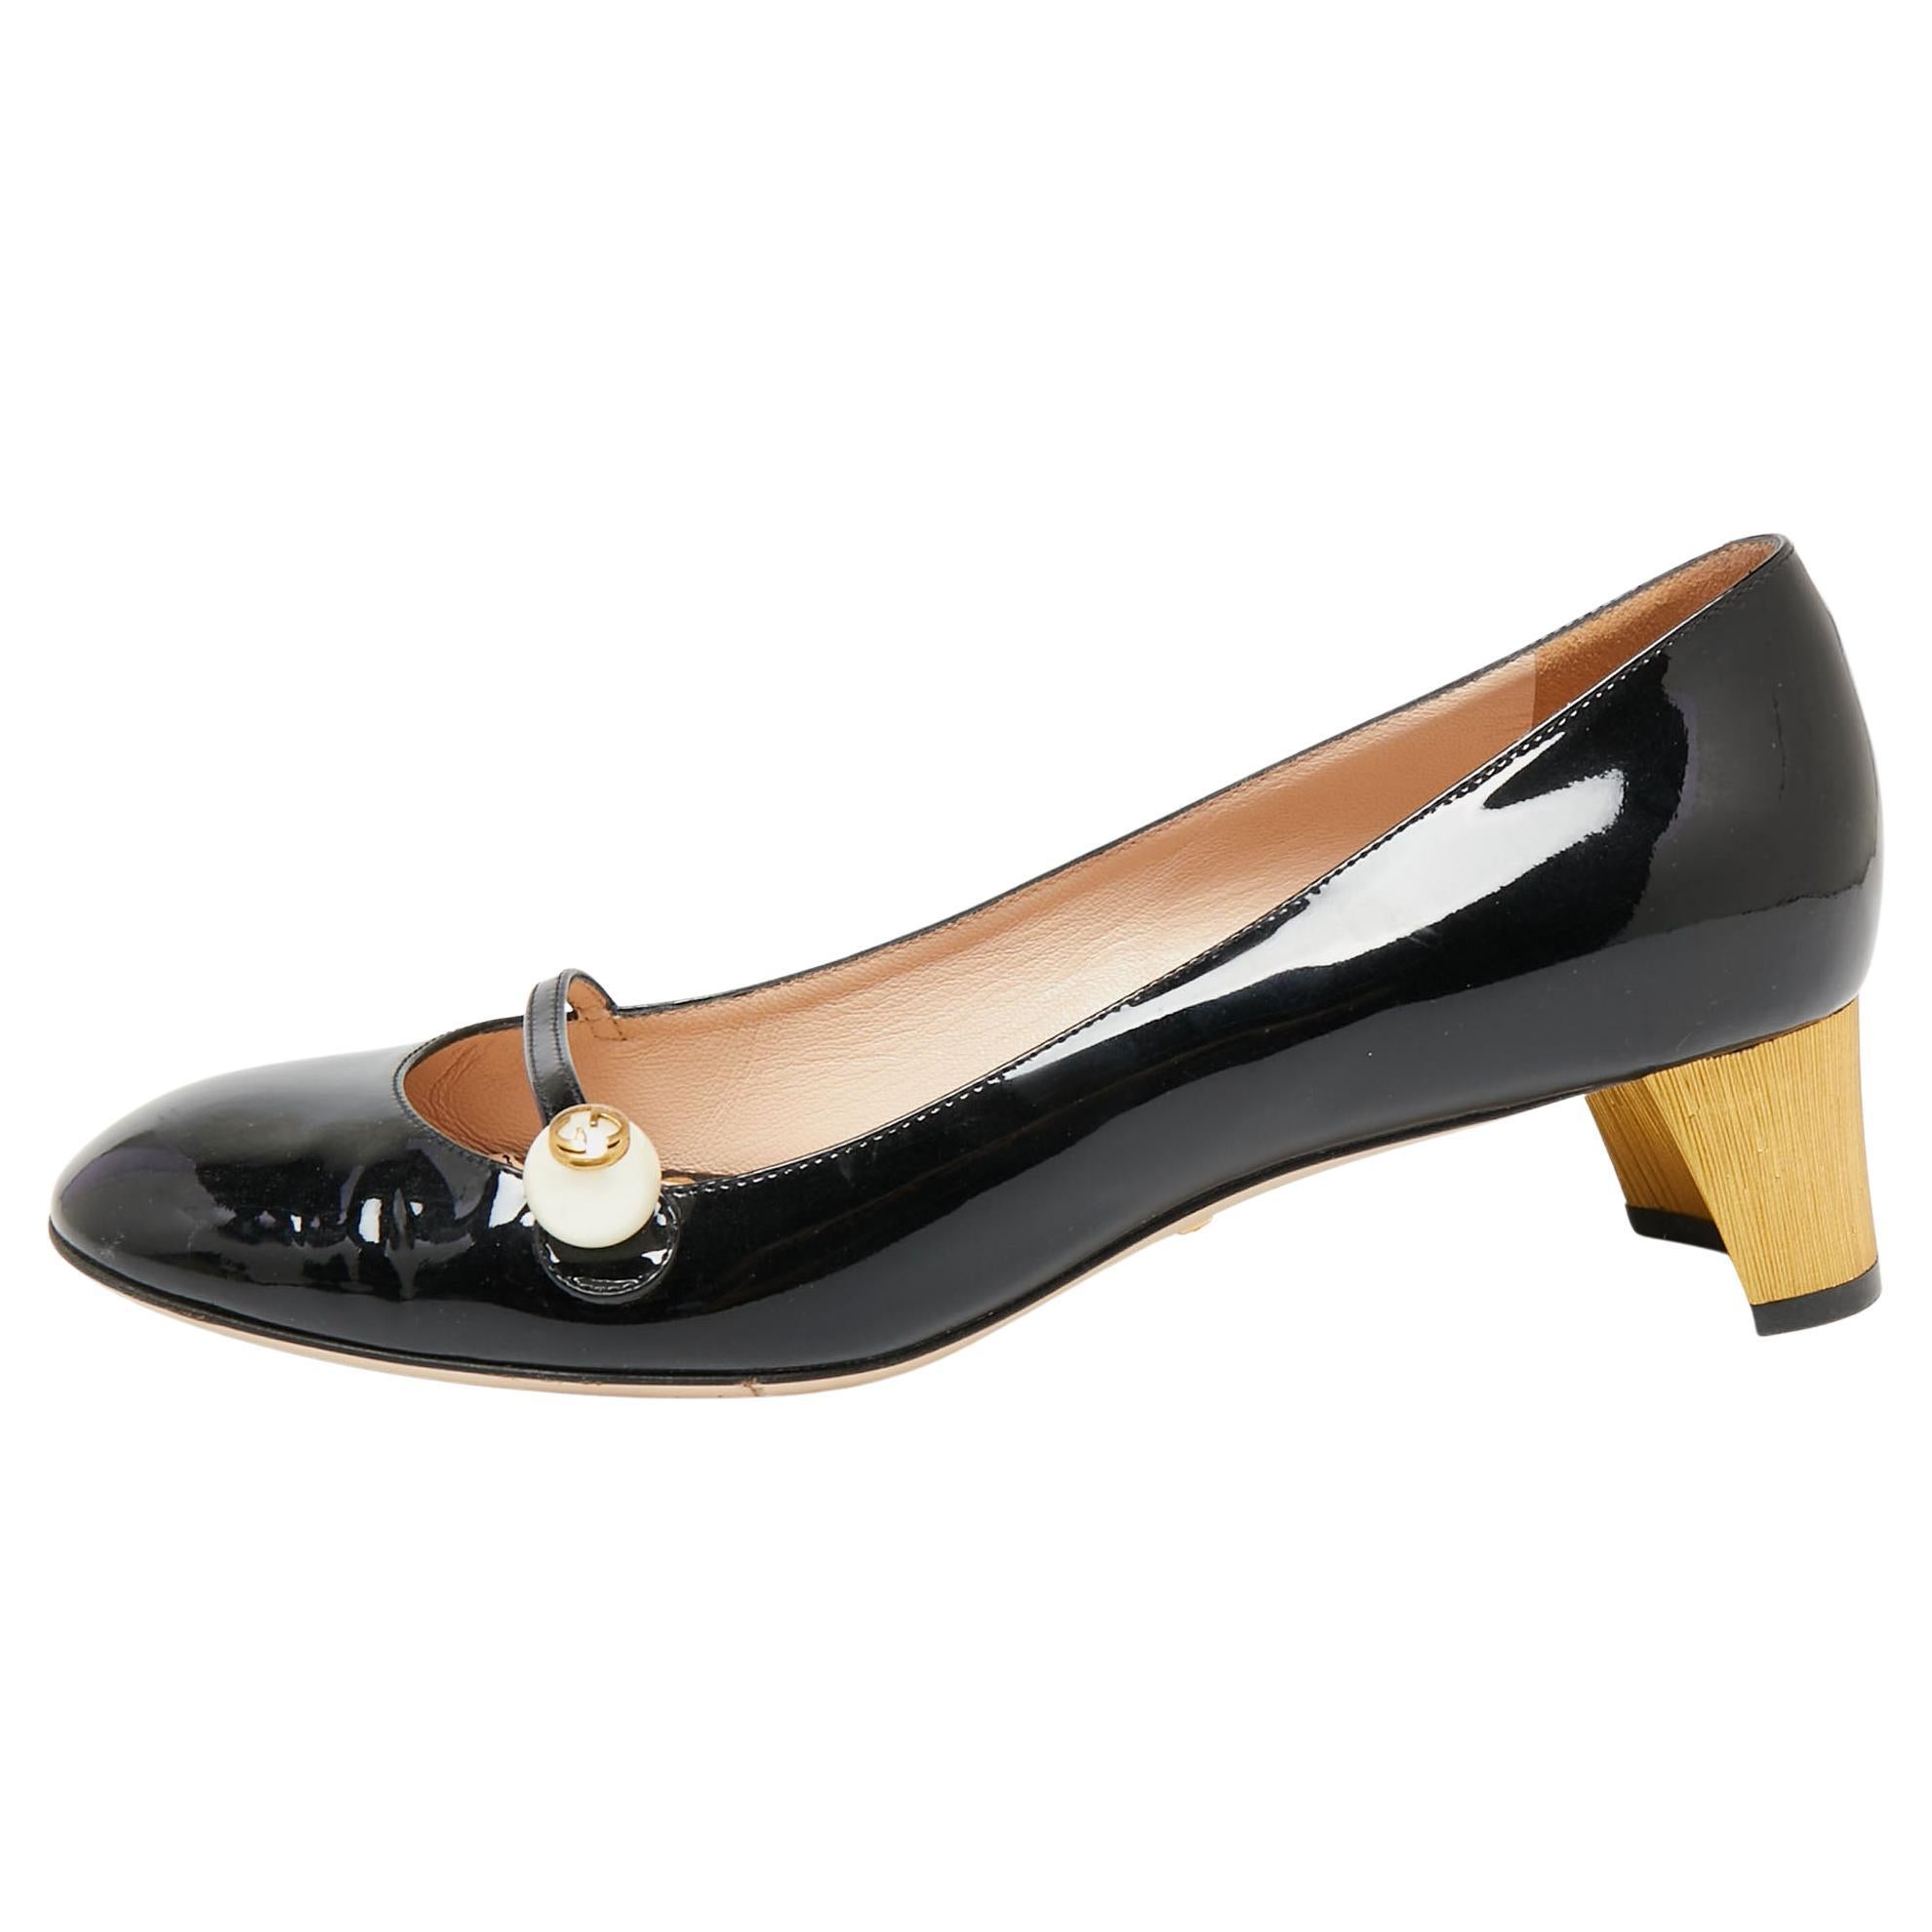 Gucci Black Patent Leather Pearl Embellished Block Heel Pumps Size 39.5